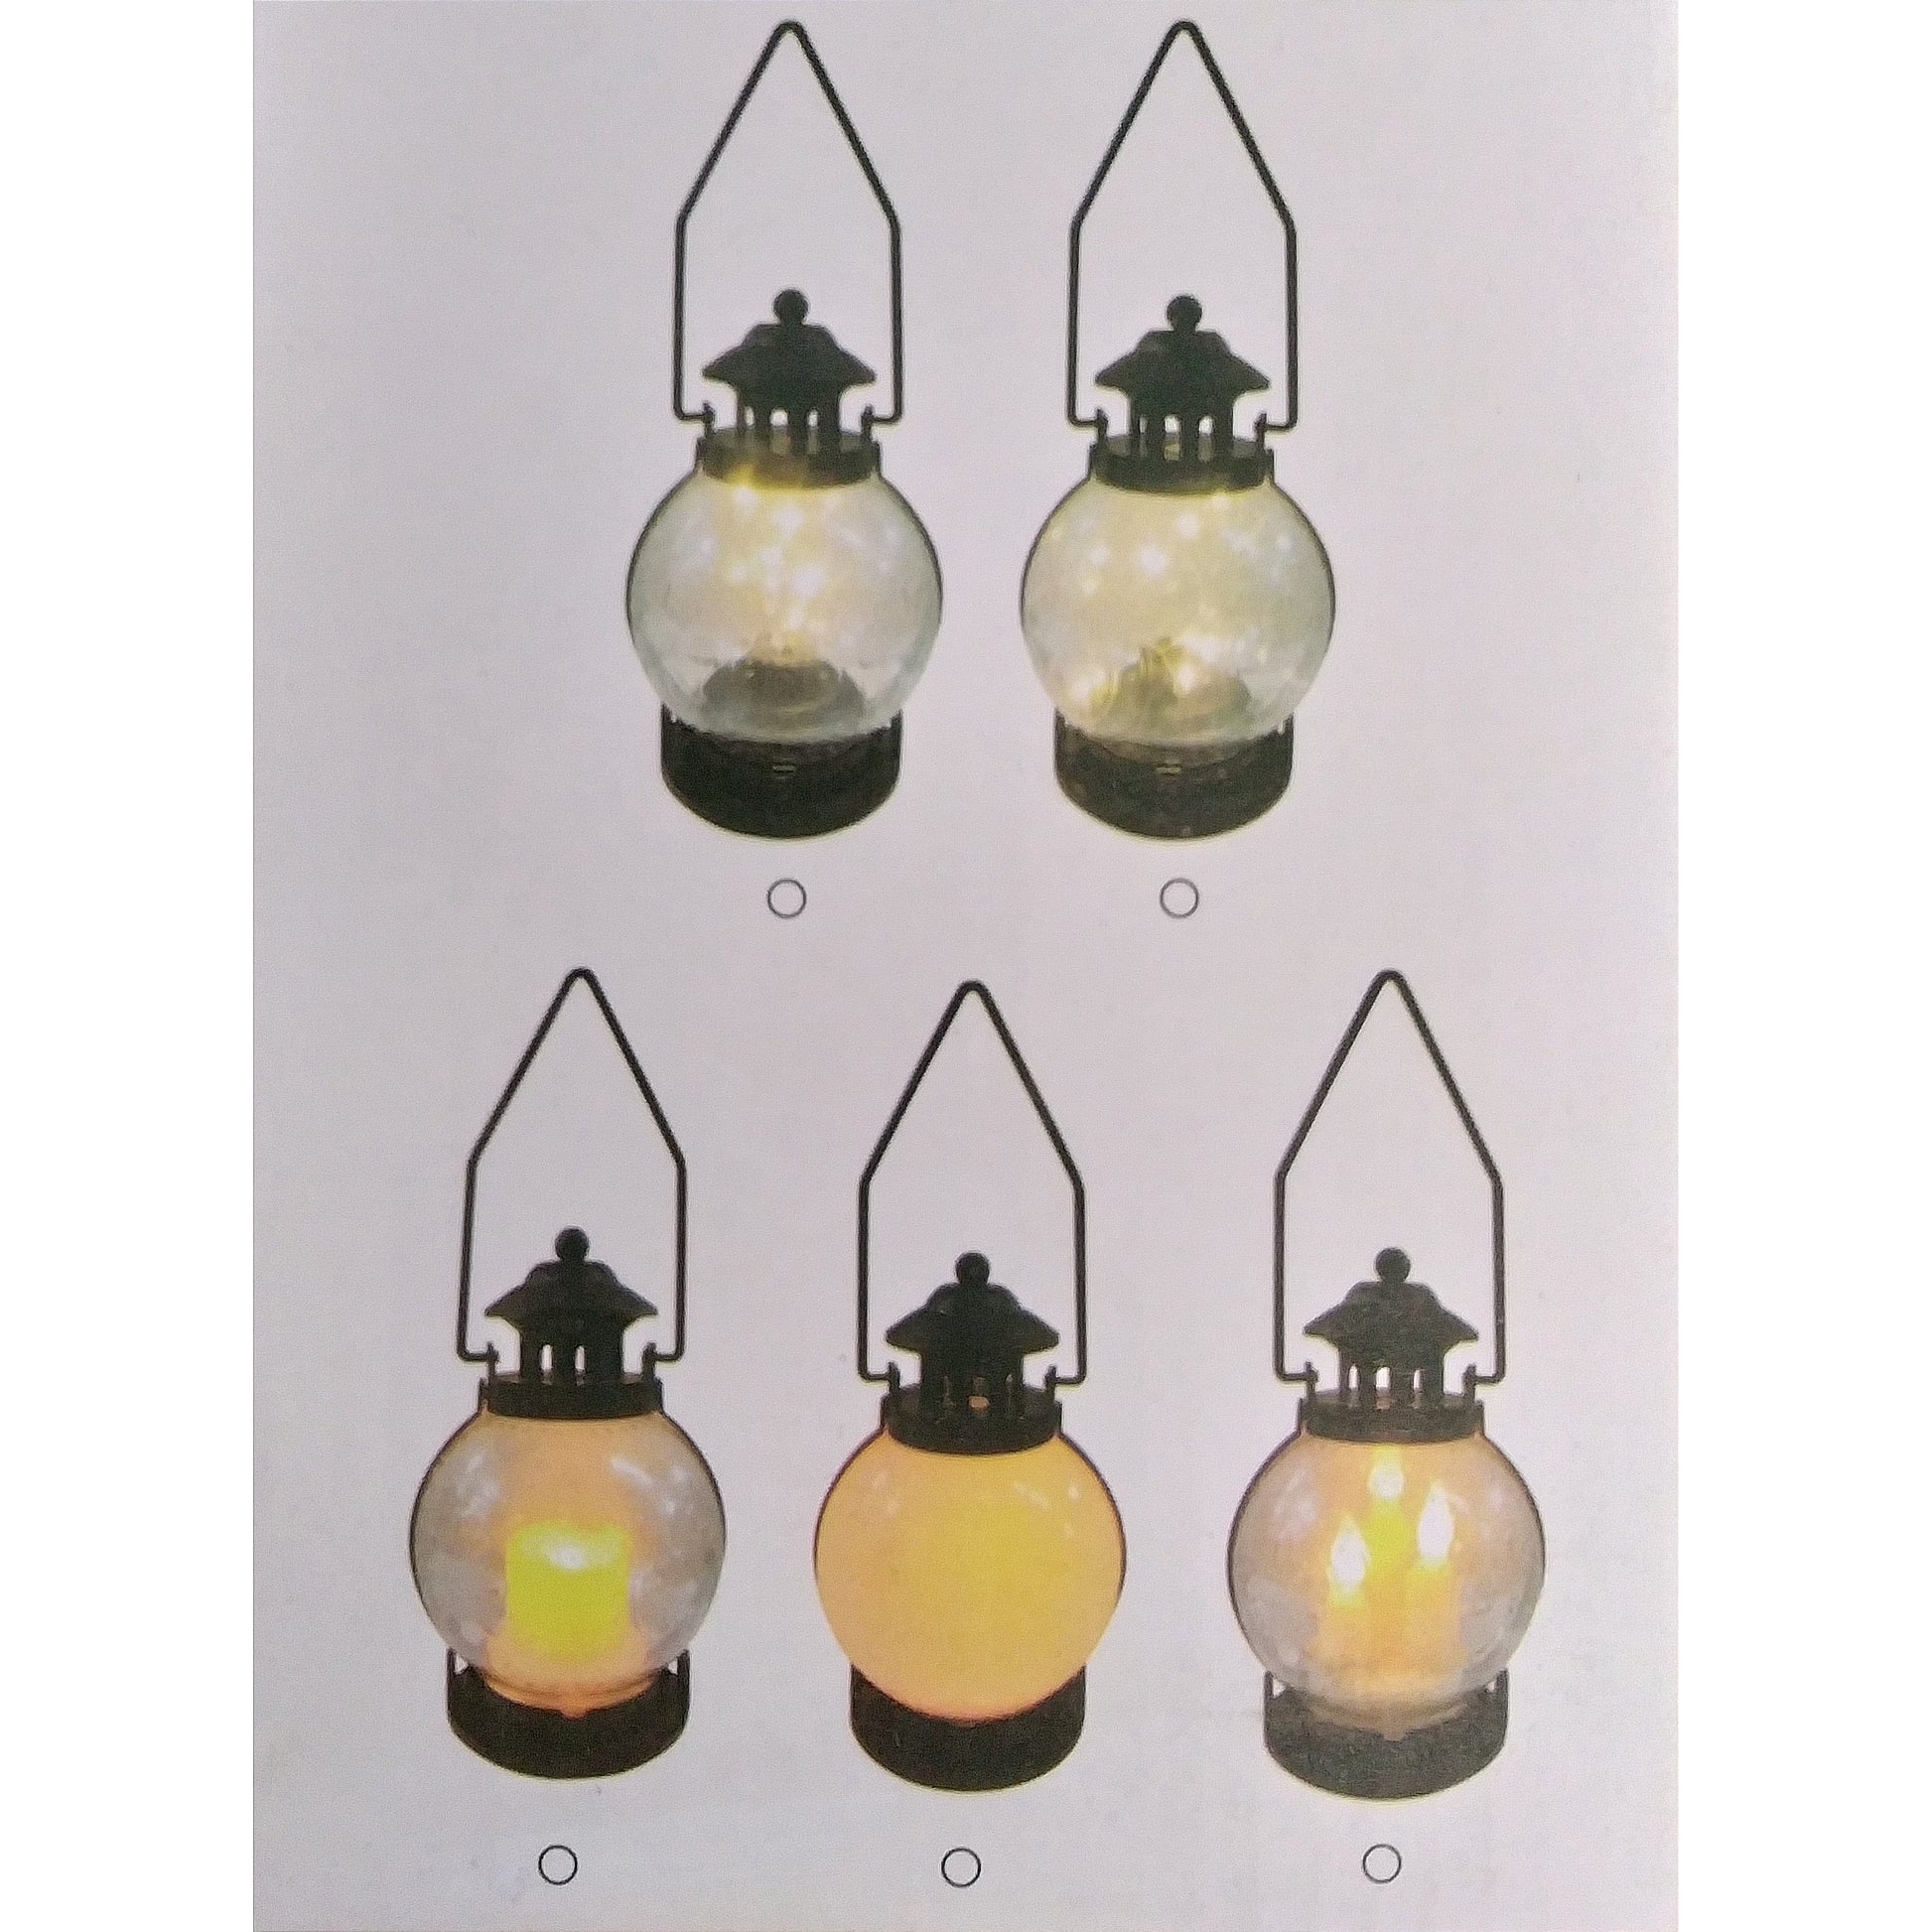 Mumbai market Lamps Candle Lantern Lamp for Diwali & christmas | Pack of 1 lamp with free batteries | Pack of 1 Candle | Assorted design